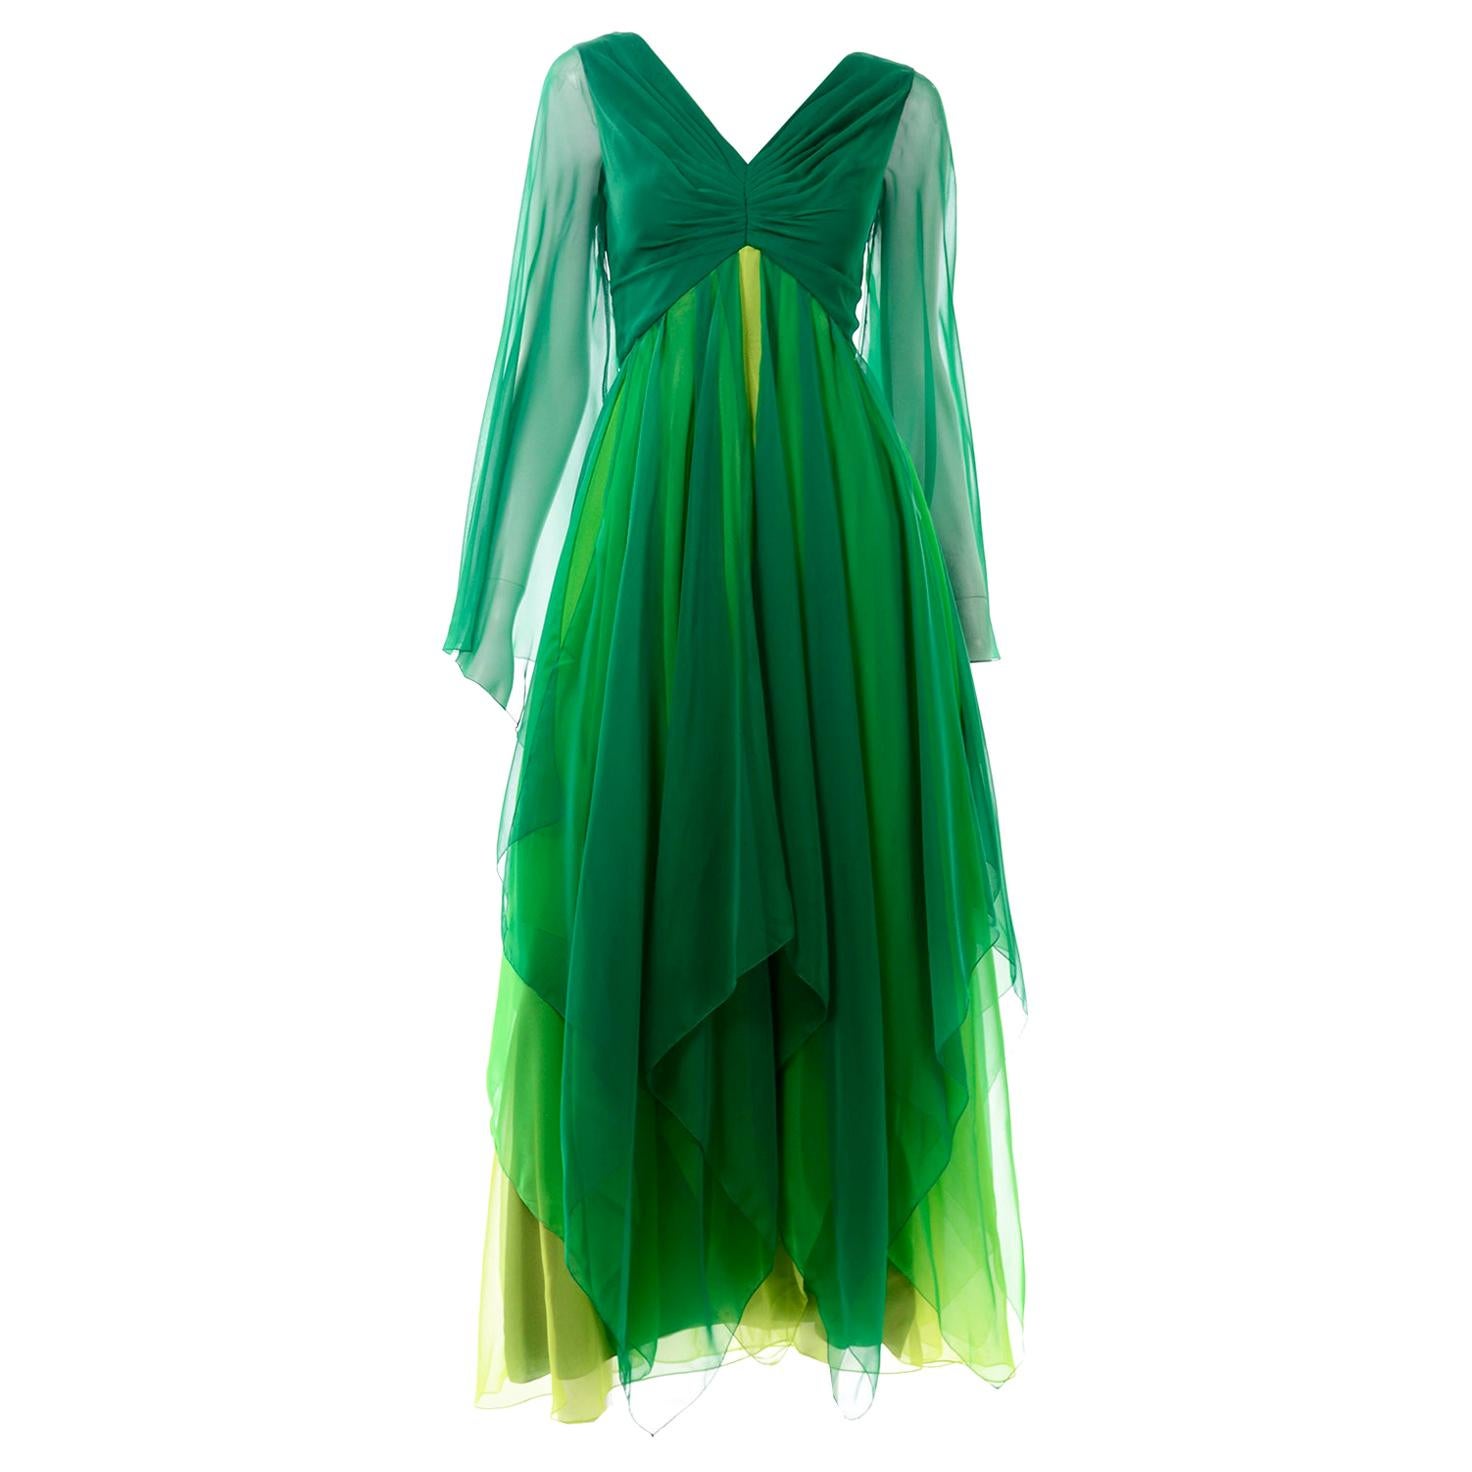 Vintage Layered Flowing Evening Dress in Multi Shades of Green Silk Chiffon 